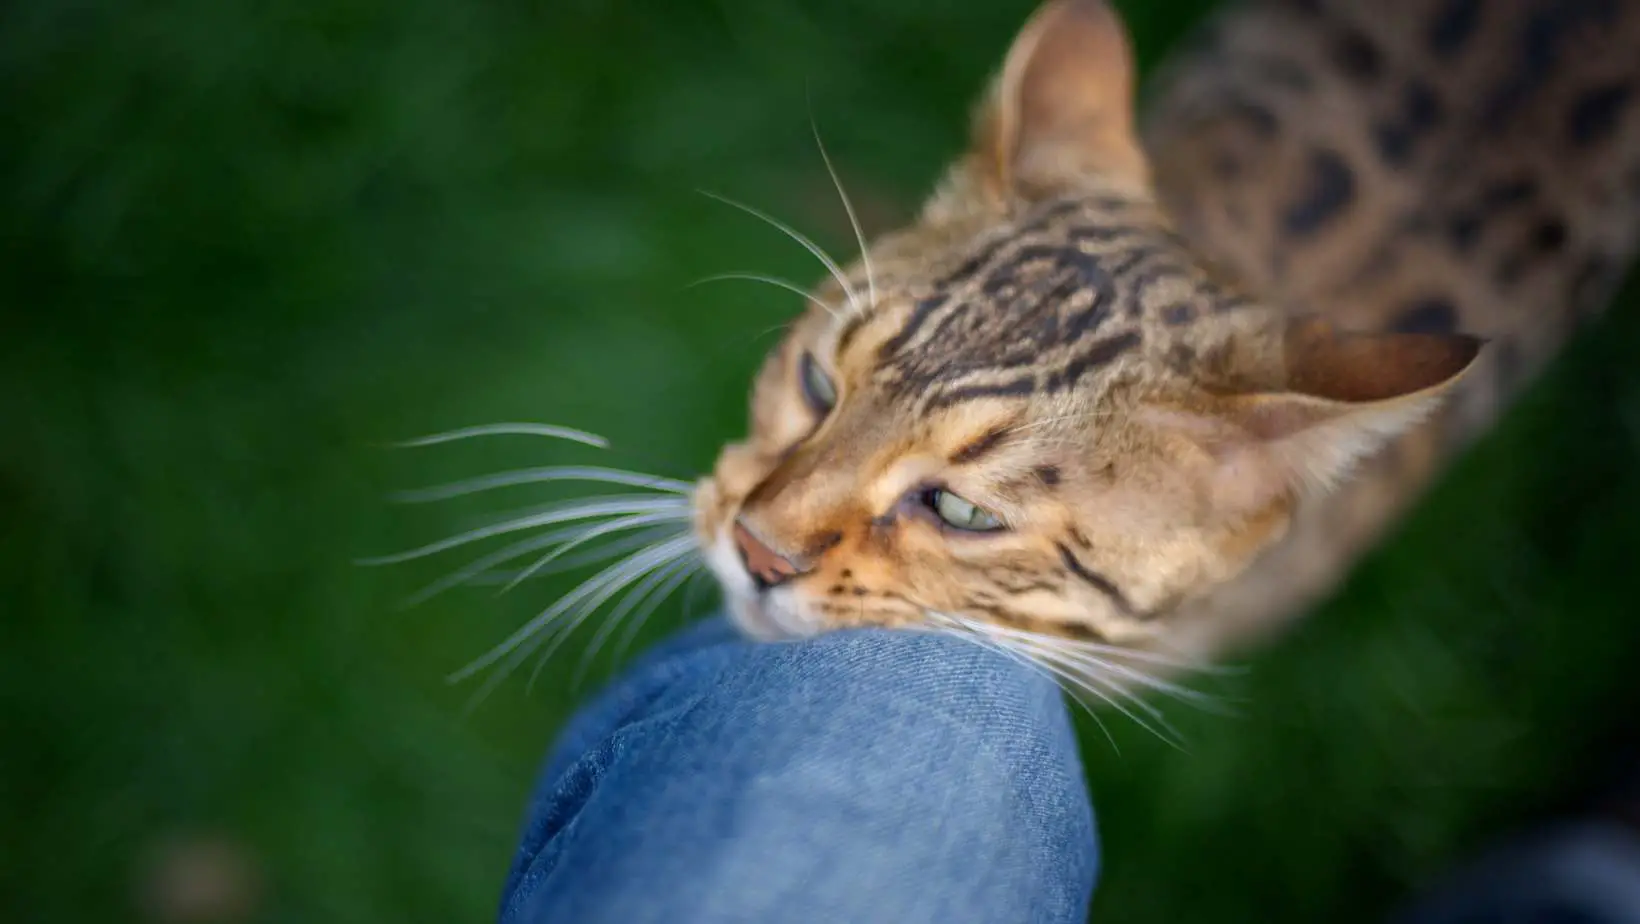 What does it mean when a cat rubs against you?